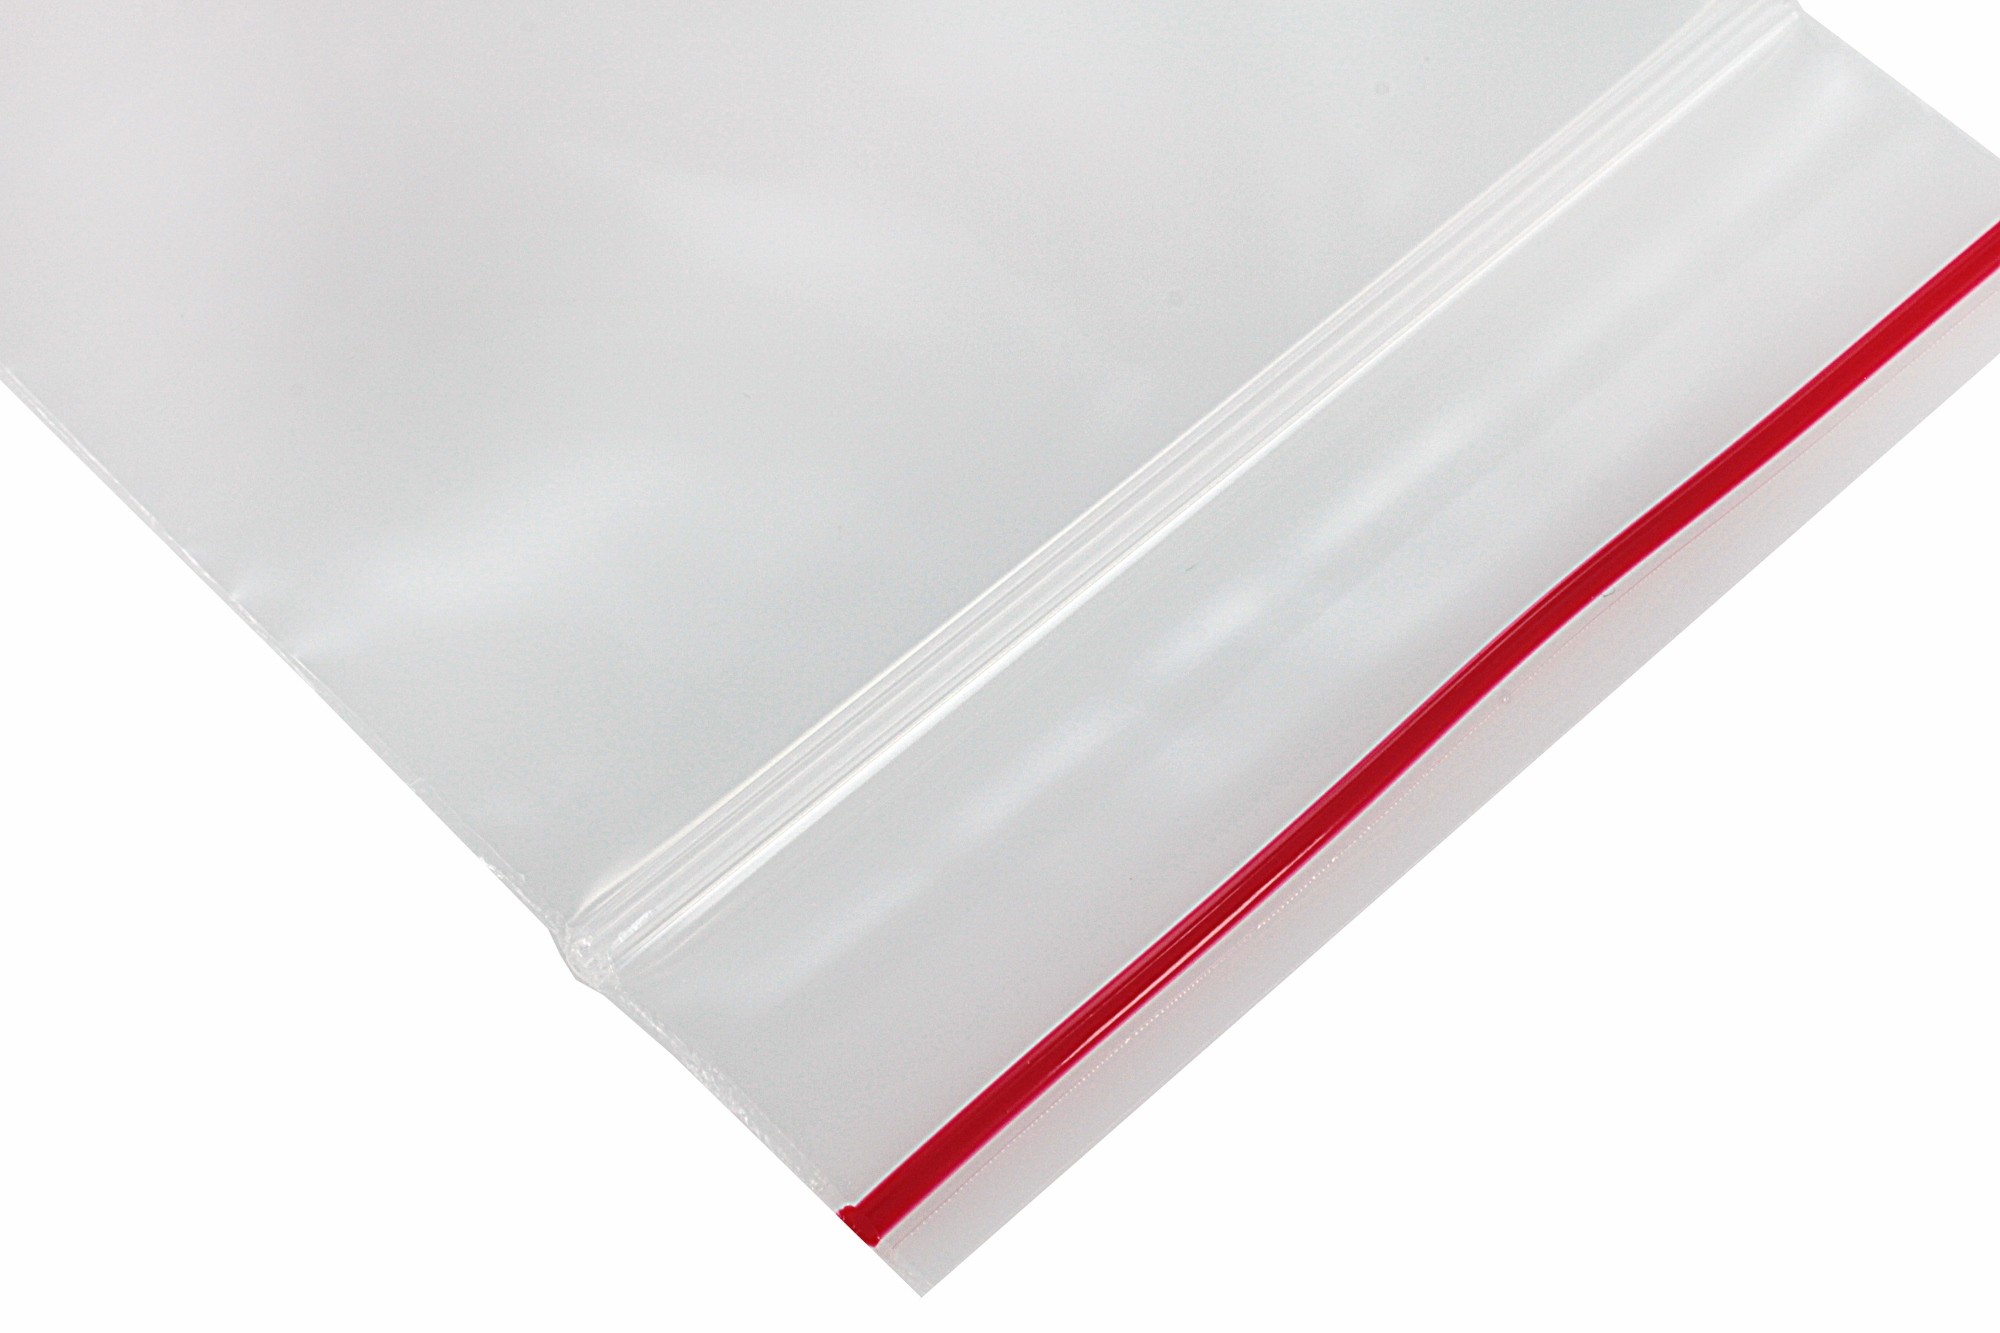 Minigrip® Red Line™ 2 x 3 Recyclable Bags with Write-on White Block &  Resin Symbol (2 mil)